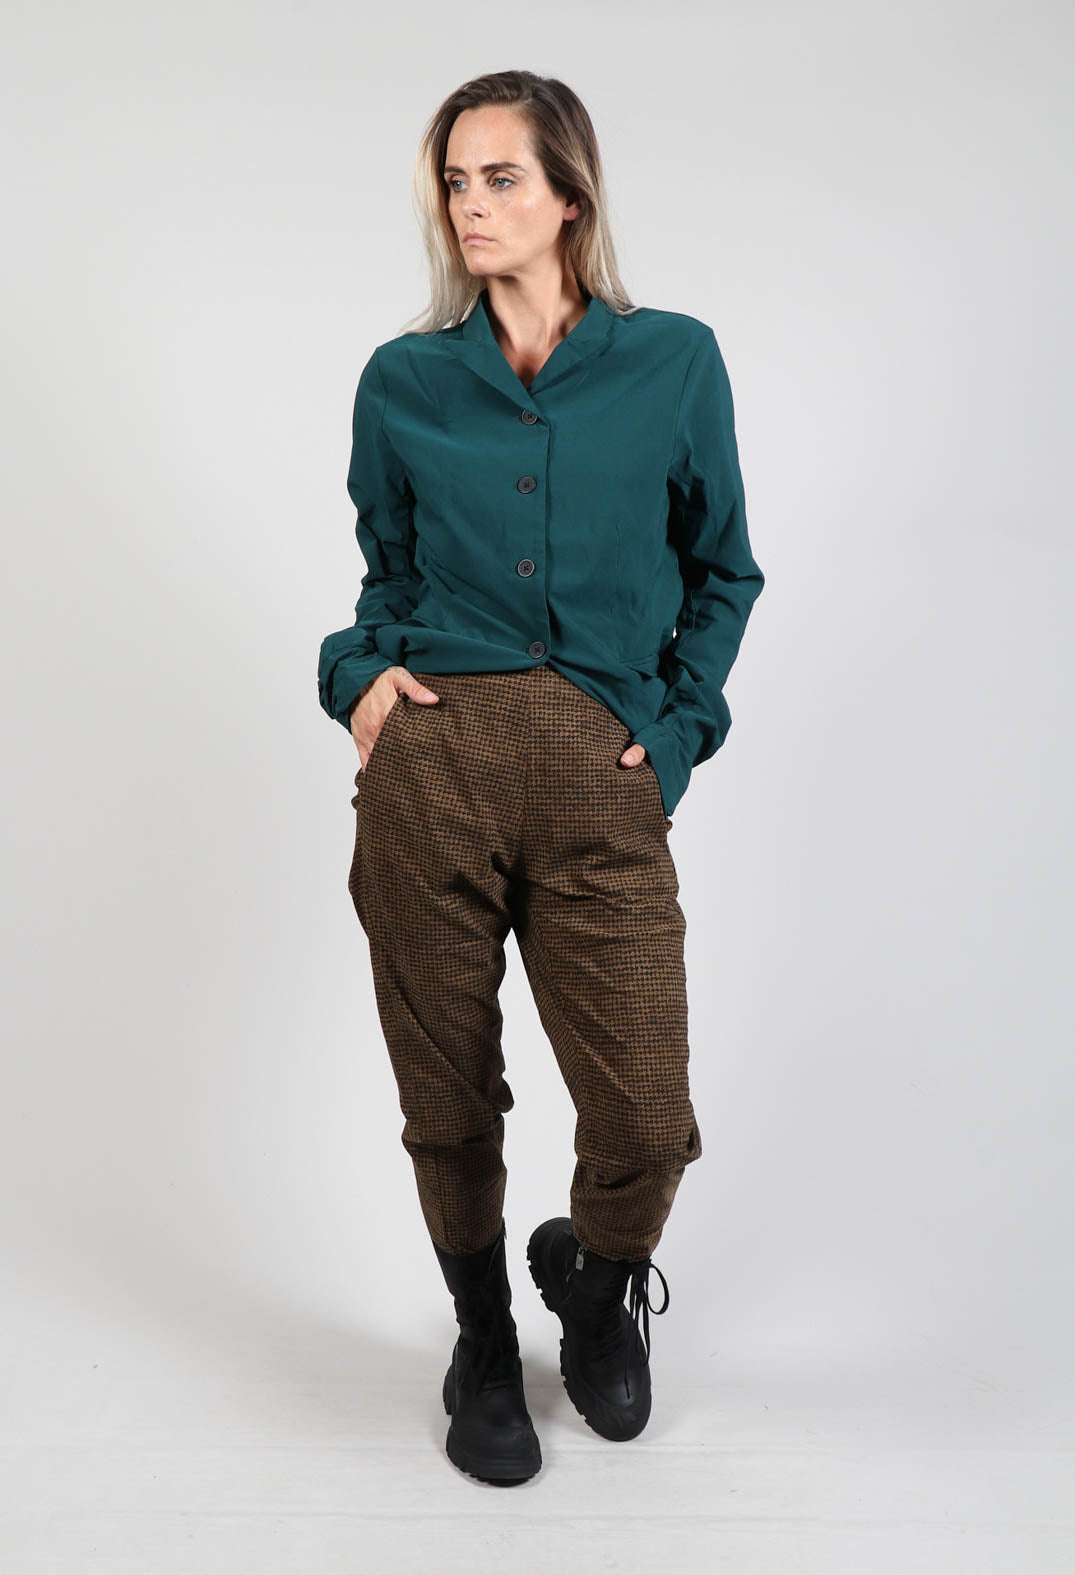 Pull On Slim Fit Trousers in Bronze Print